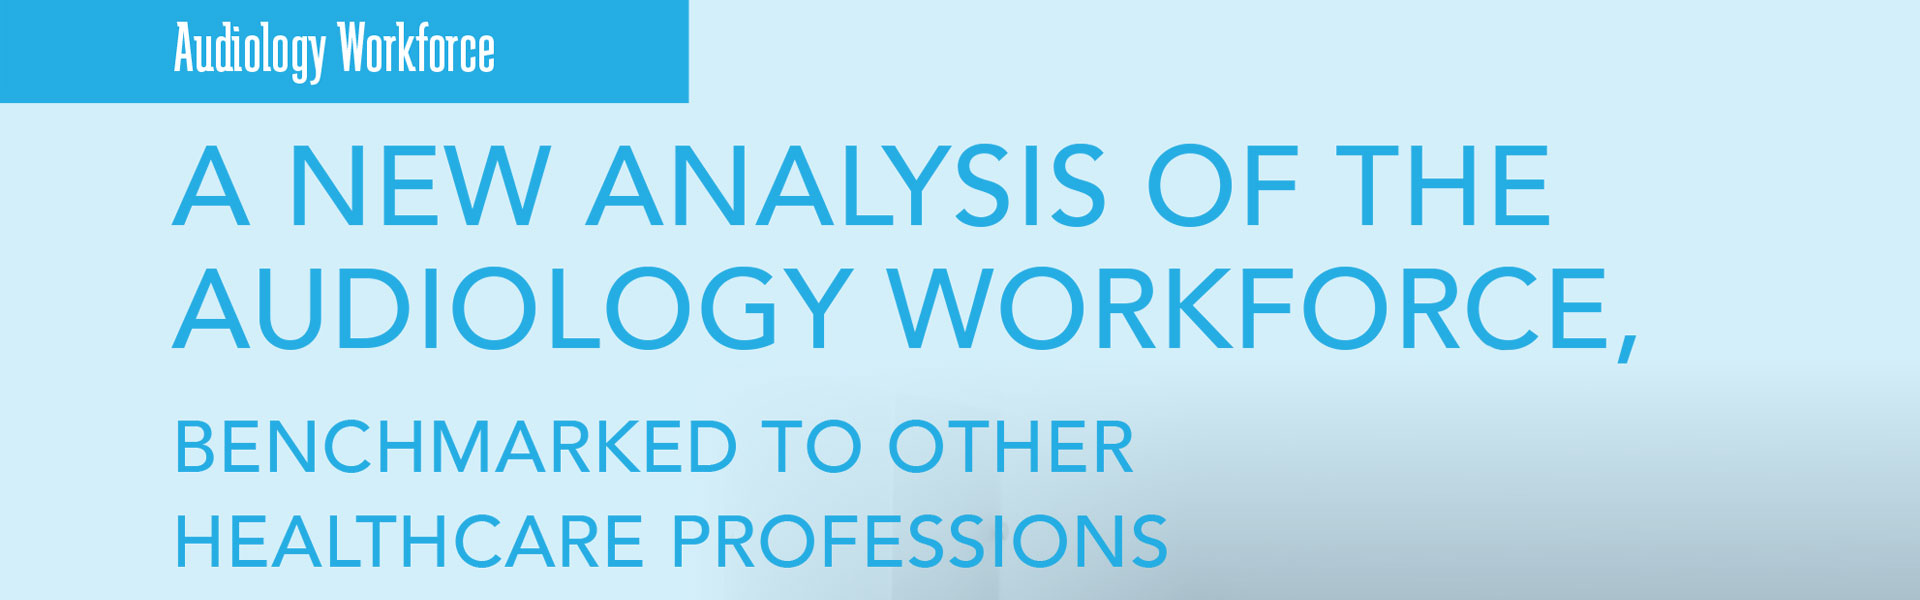 A New Analysis of the Audiology Workforce, Benchmarked to Other Healthcare Professions